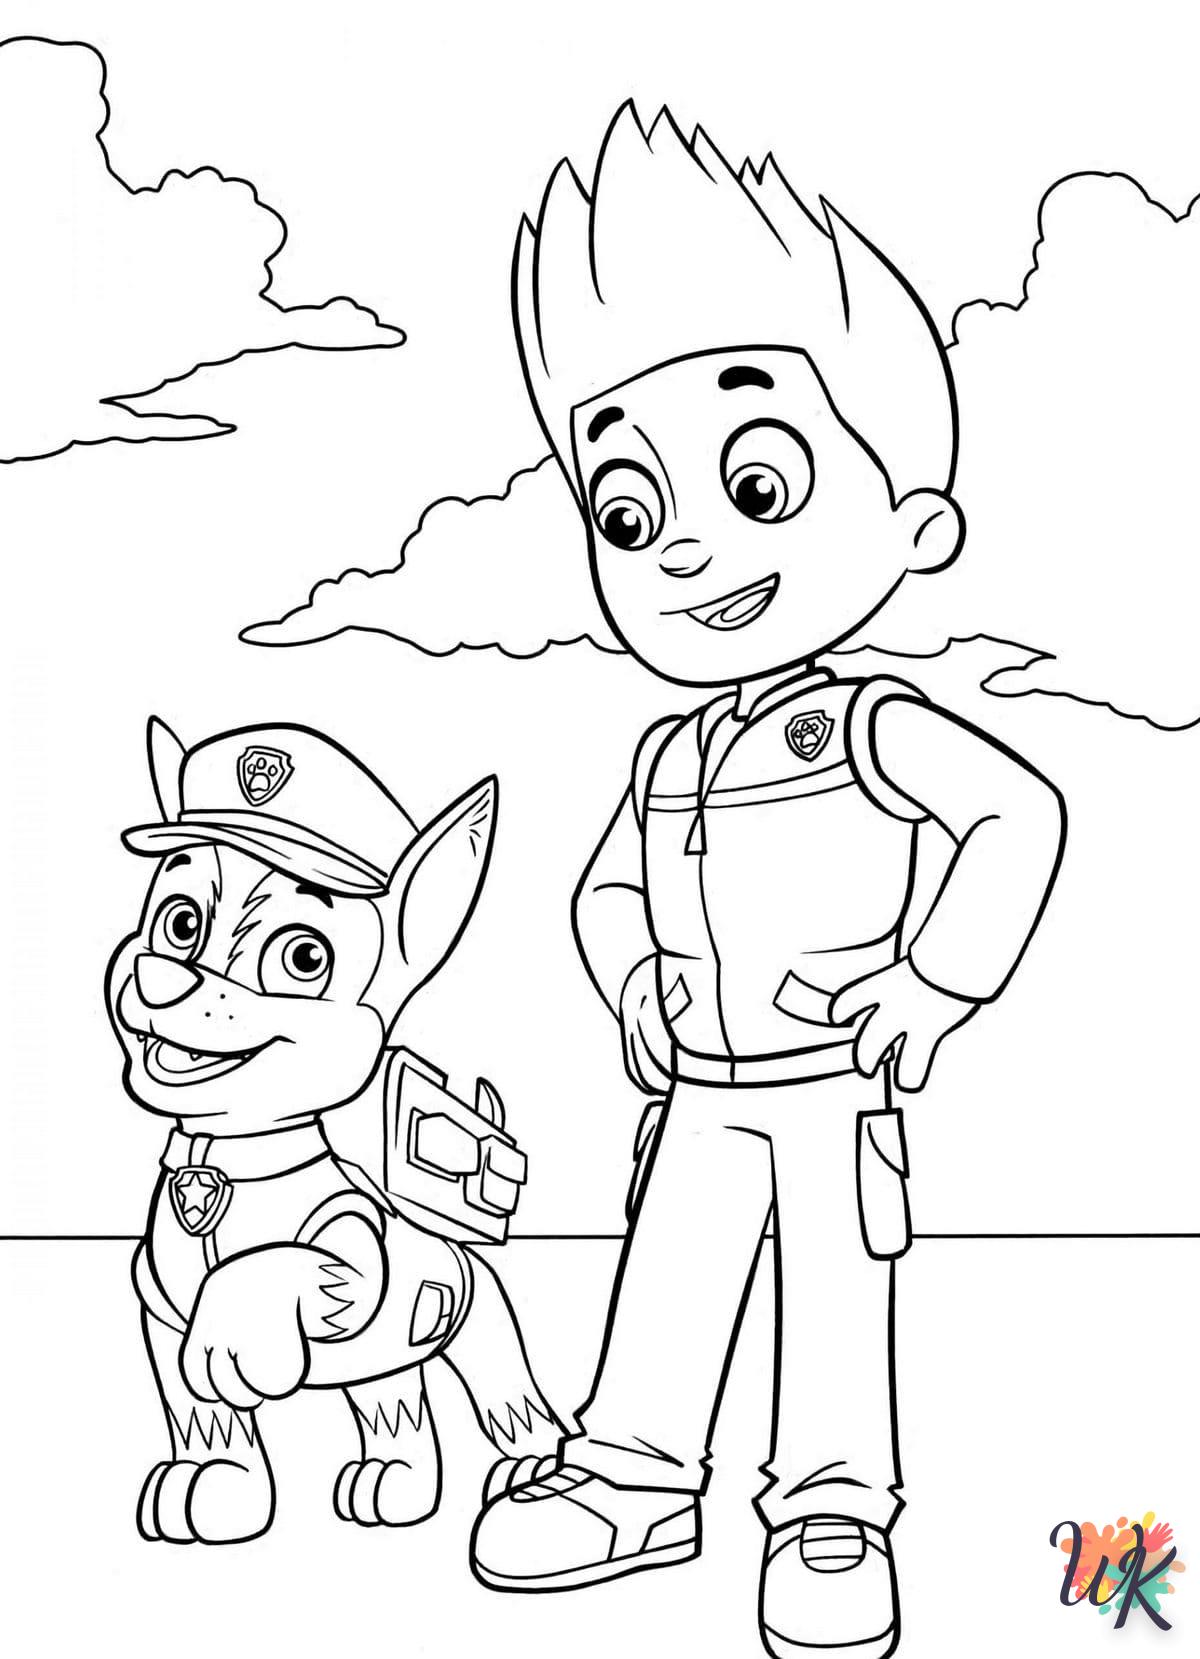 Paw Patrol coloring for 10 year olds